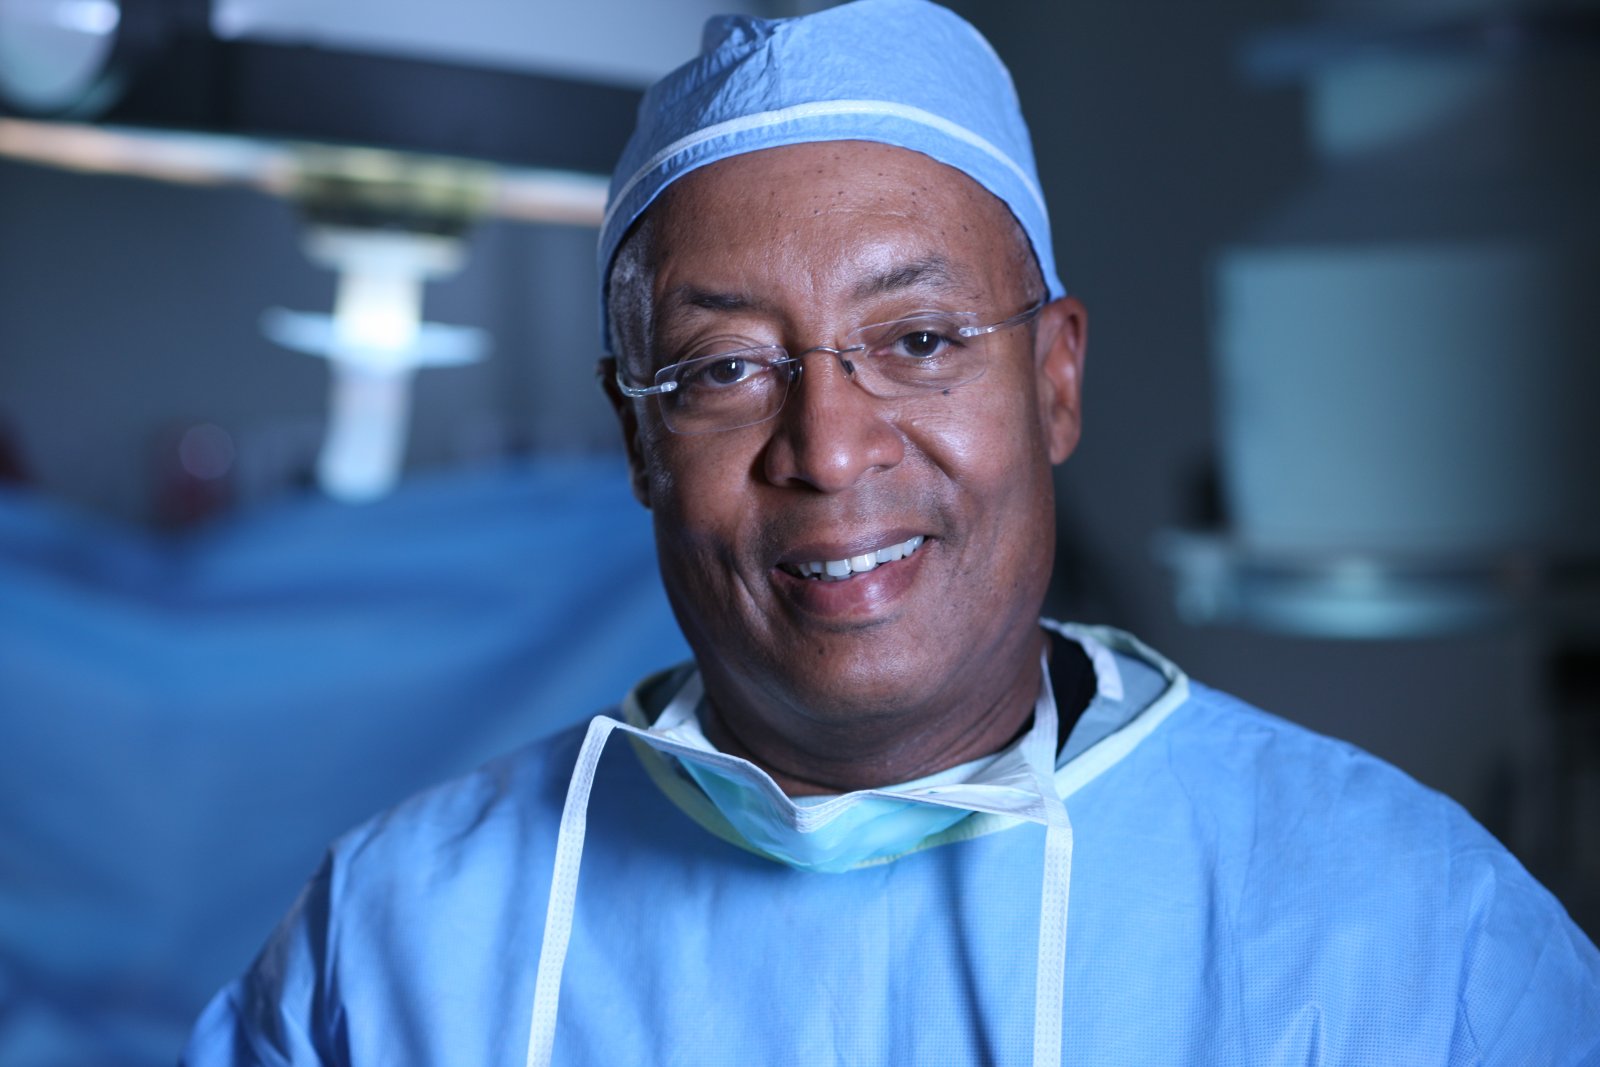 W. Bedford Waters MD poses in blue scrubs in an operating room